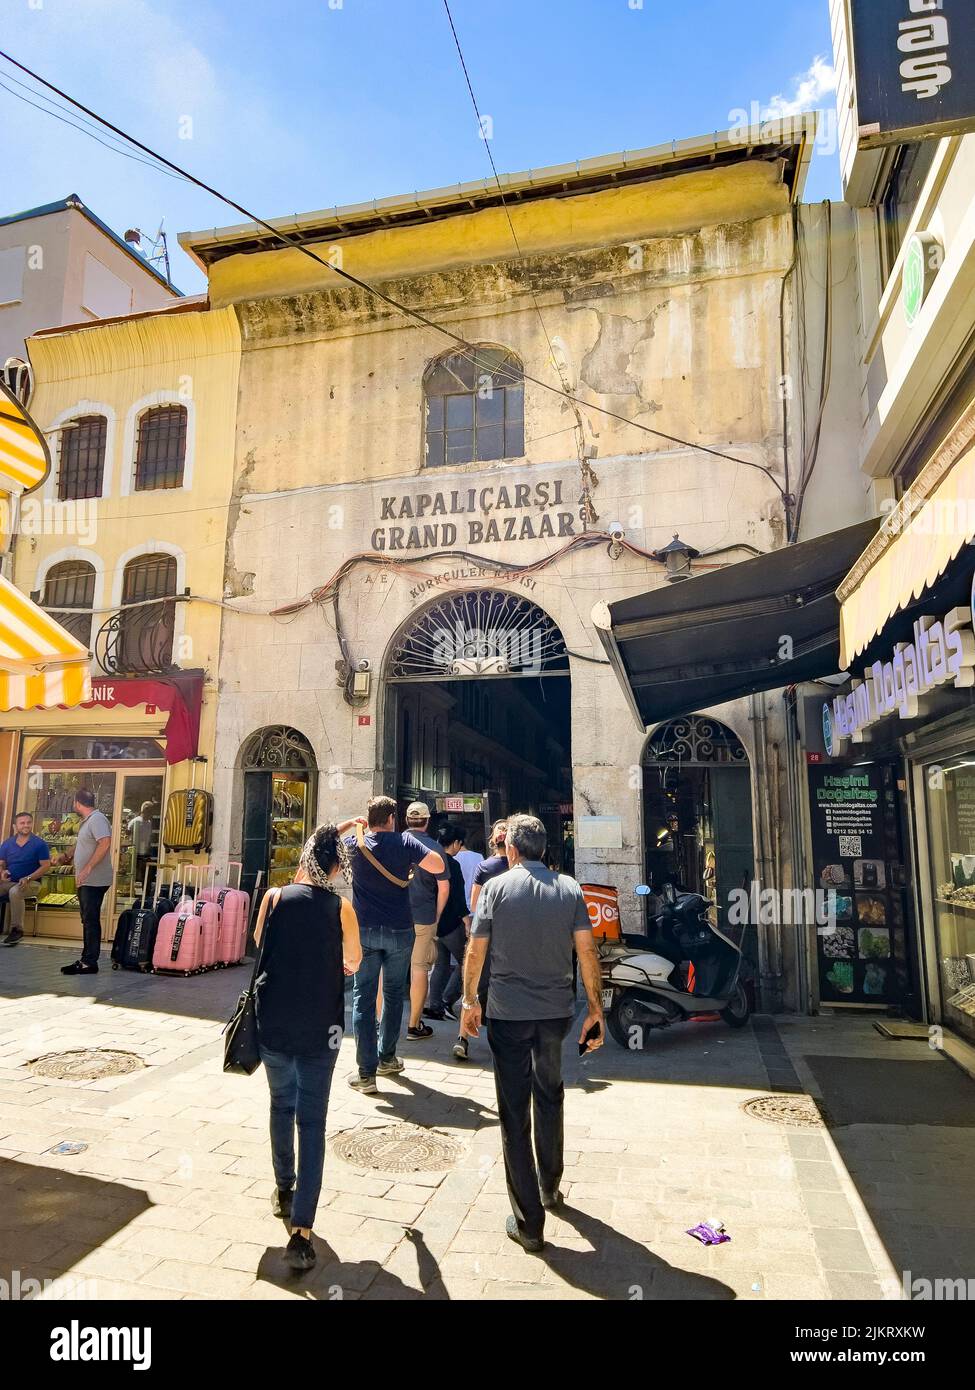 Istanbul, Turkey - July 14, 2022: Tourist men and women, rear view, walking into the Grand Bazaar at the Kurkculer Gate. Exterior of the Grand Ottoman Stock Photo